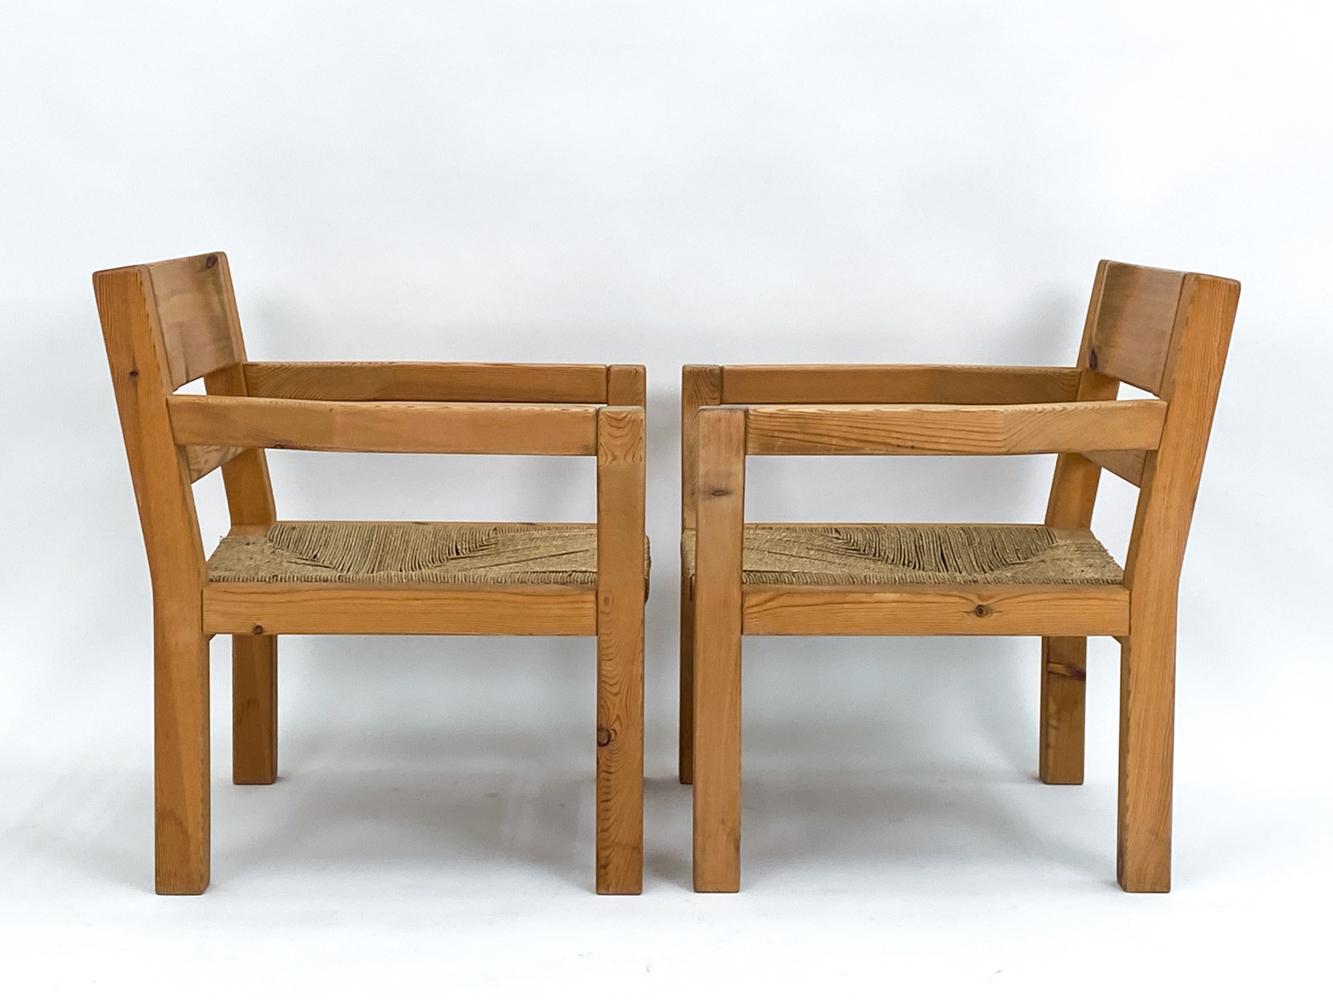 Pair of Tage Poulsen Pine & Rush Seat Lounge Chairs, c. 1970's For Sale 1